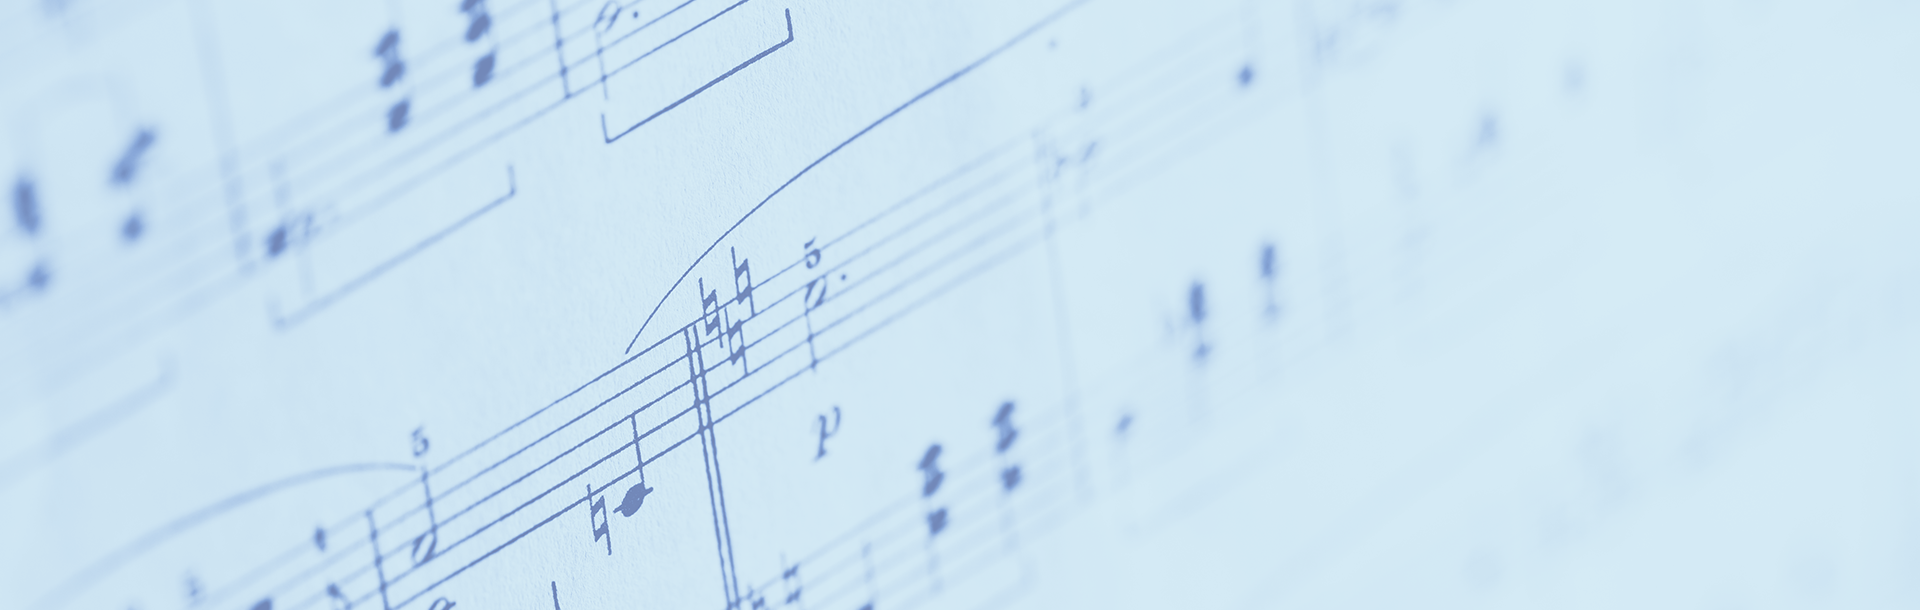  This image features a close-up view of a sheet of music, focusing on the staves and notes to create a soft, blurred effect.